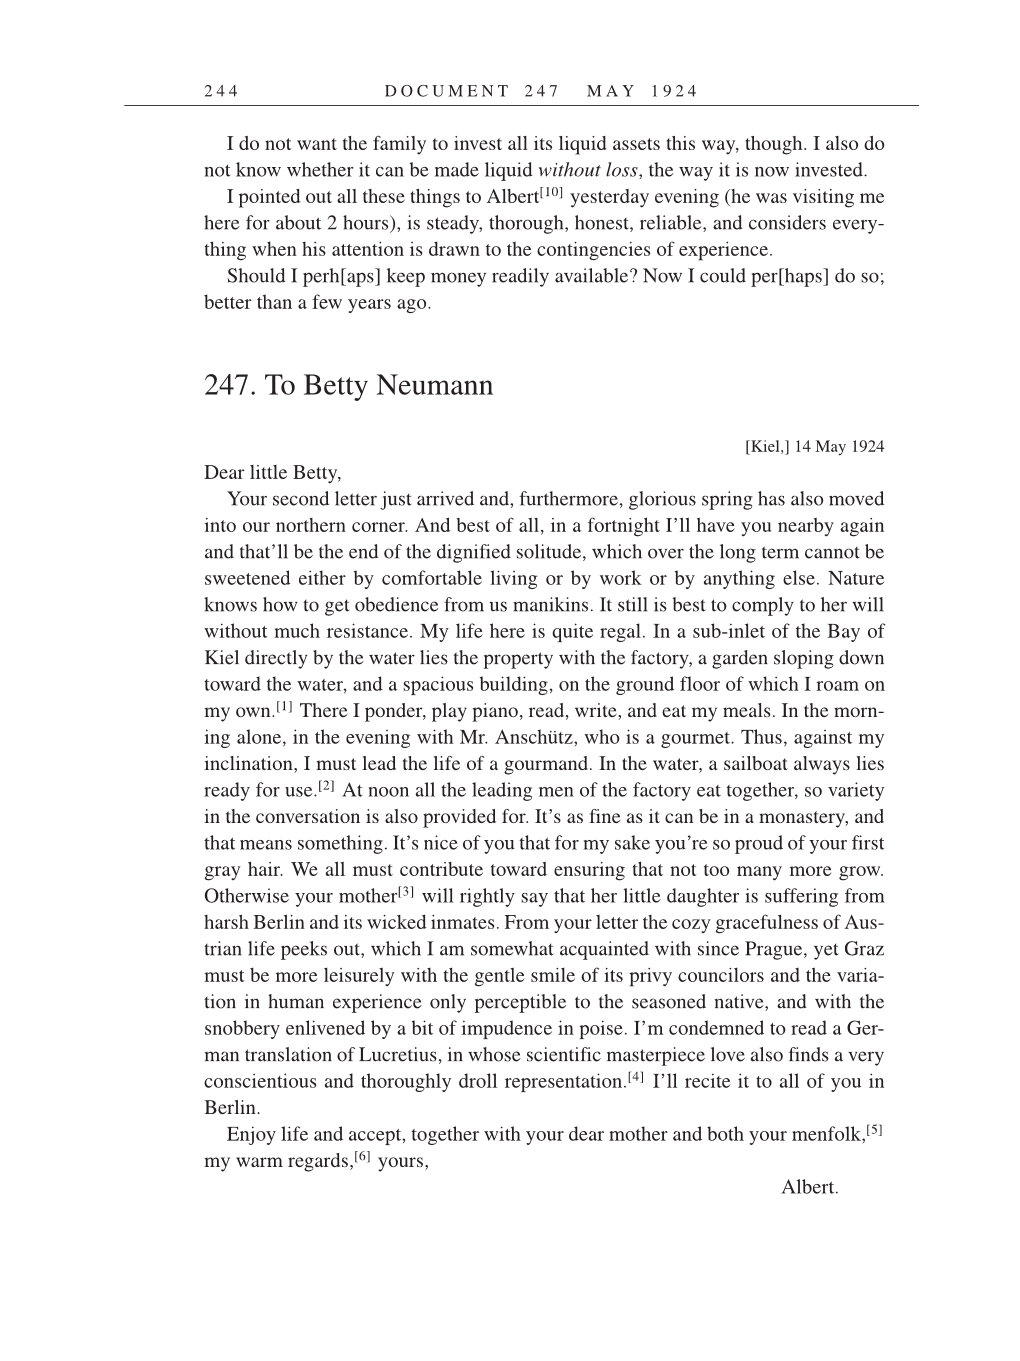 Volume 14: The Berlin Years: Writings & Correspondence, April 1923-May 1925 (English Translation Supplement) page 244